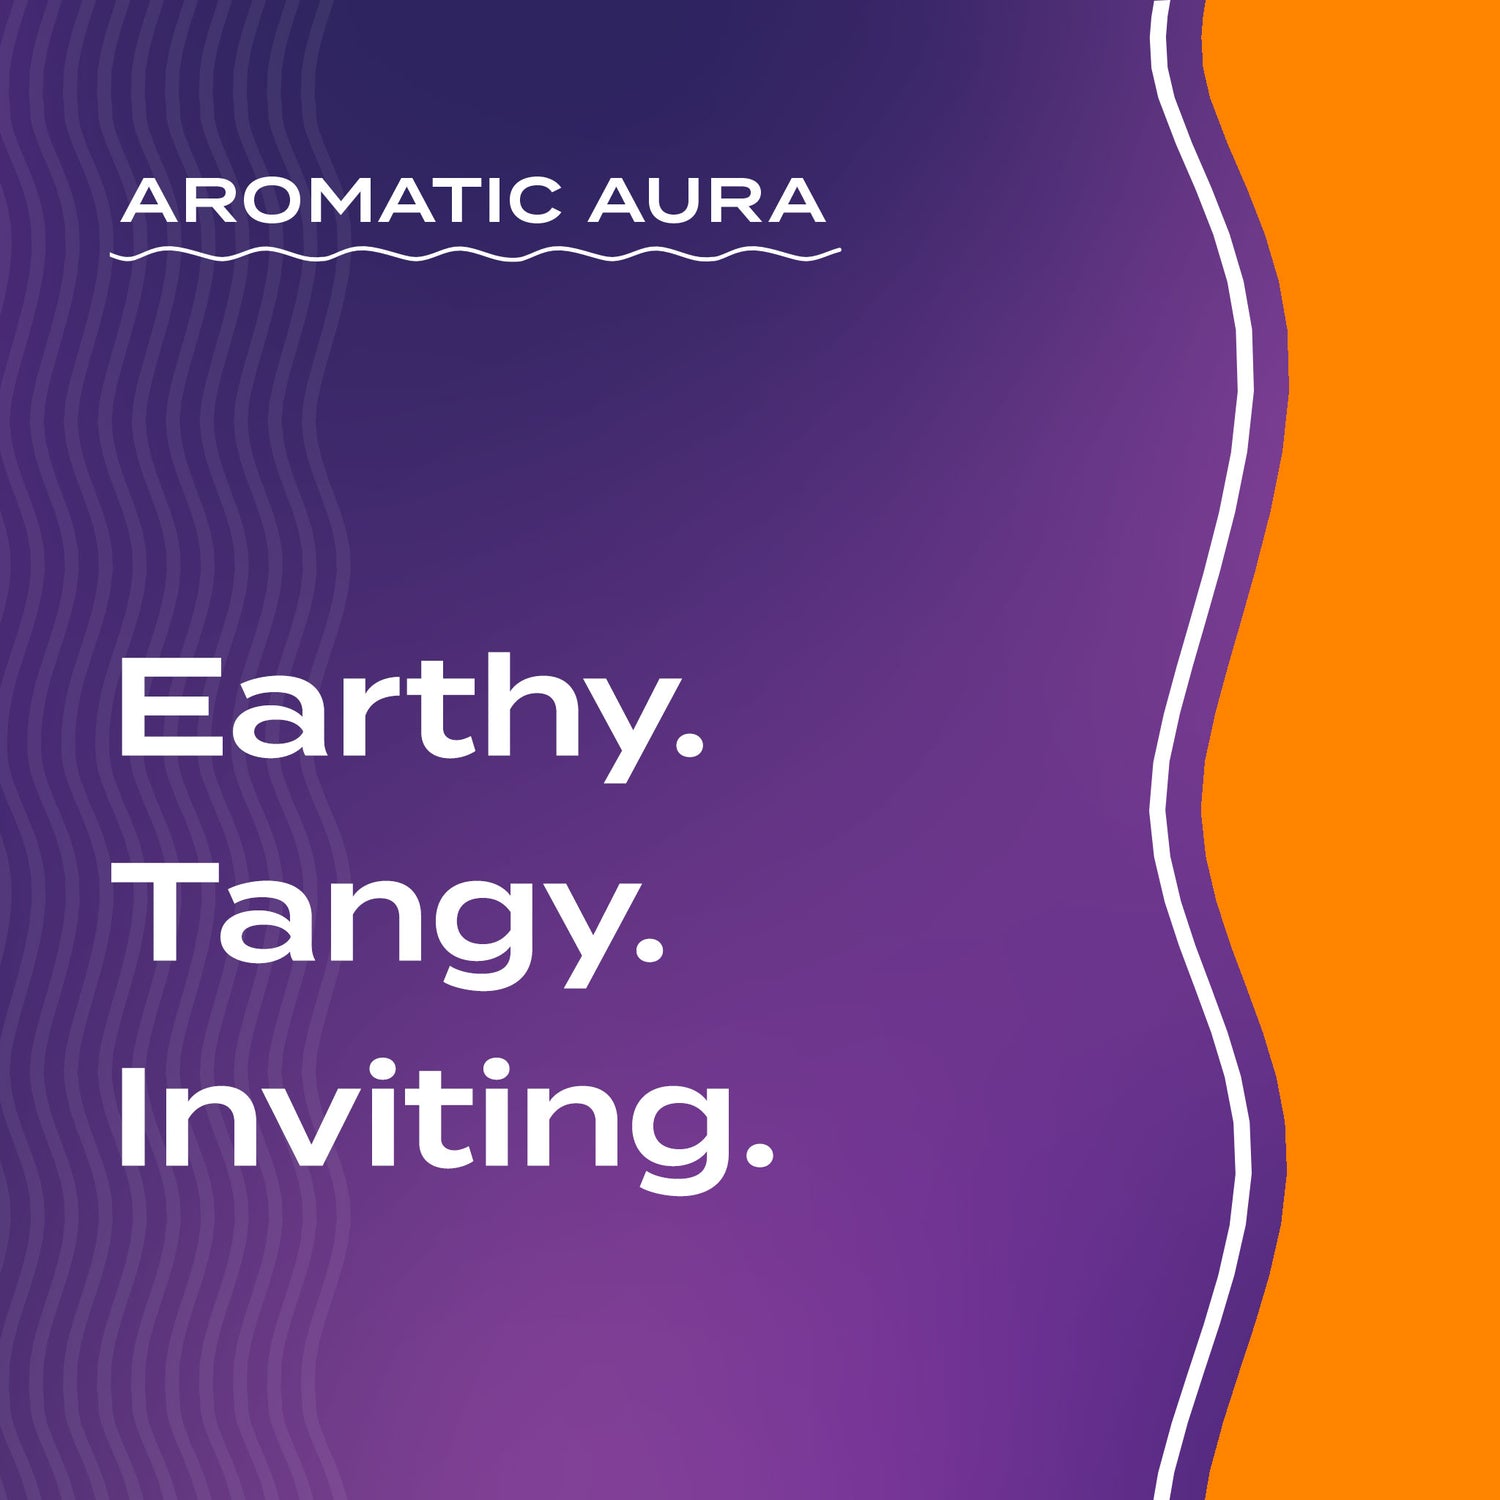 Text graphic depicting the aromatic aroma of Patchouli-Orange: Earthy, Tangy, Inviting.